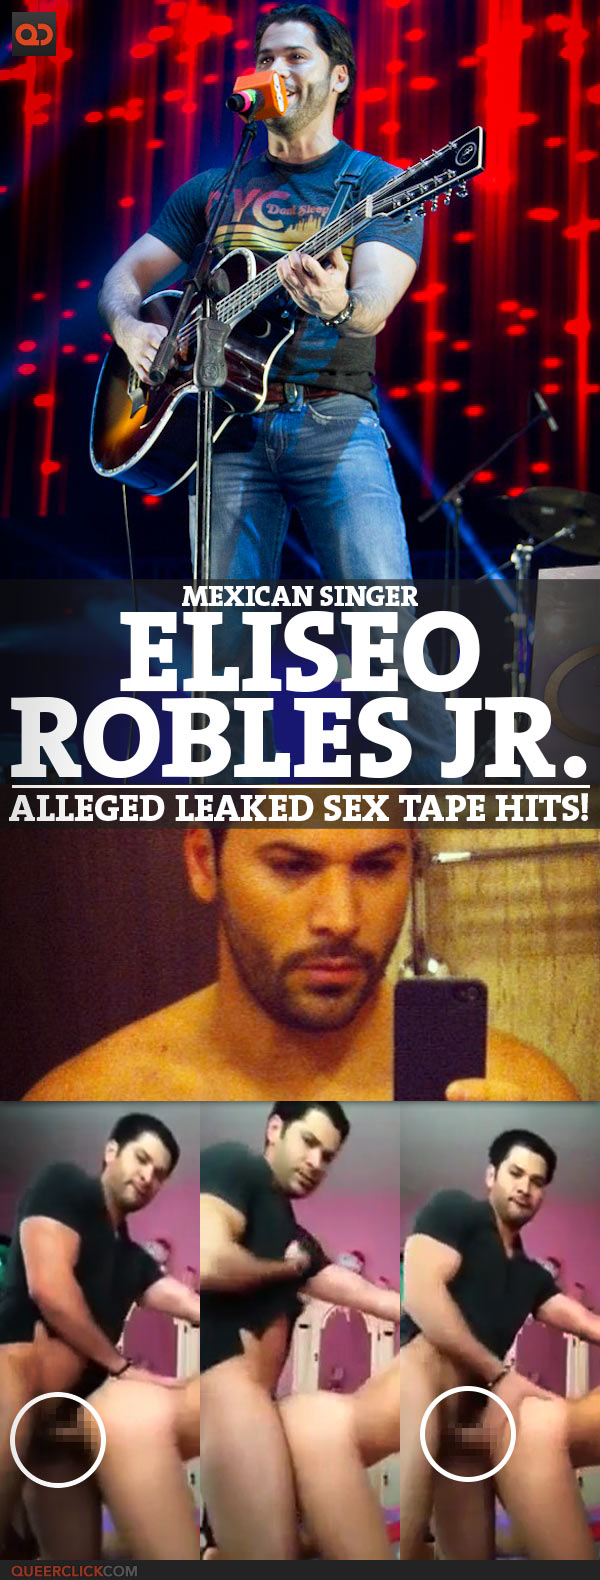 Eliseo Robles JR., Mexican Singer, Alleged Leaked Sex Tape Hits!